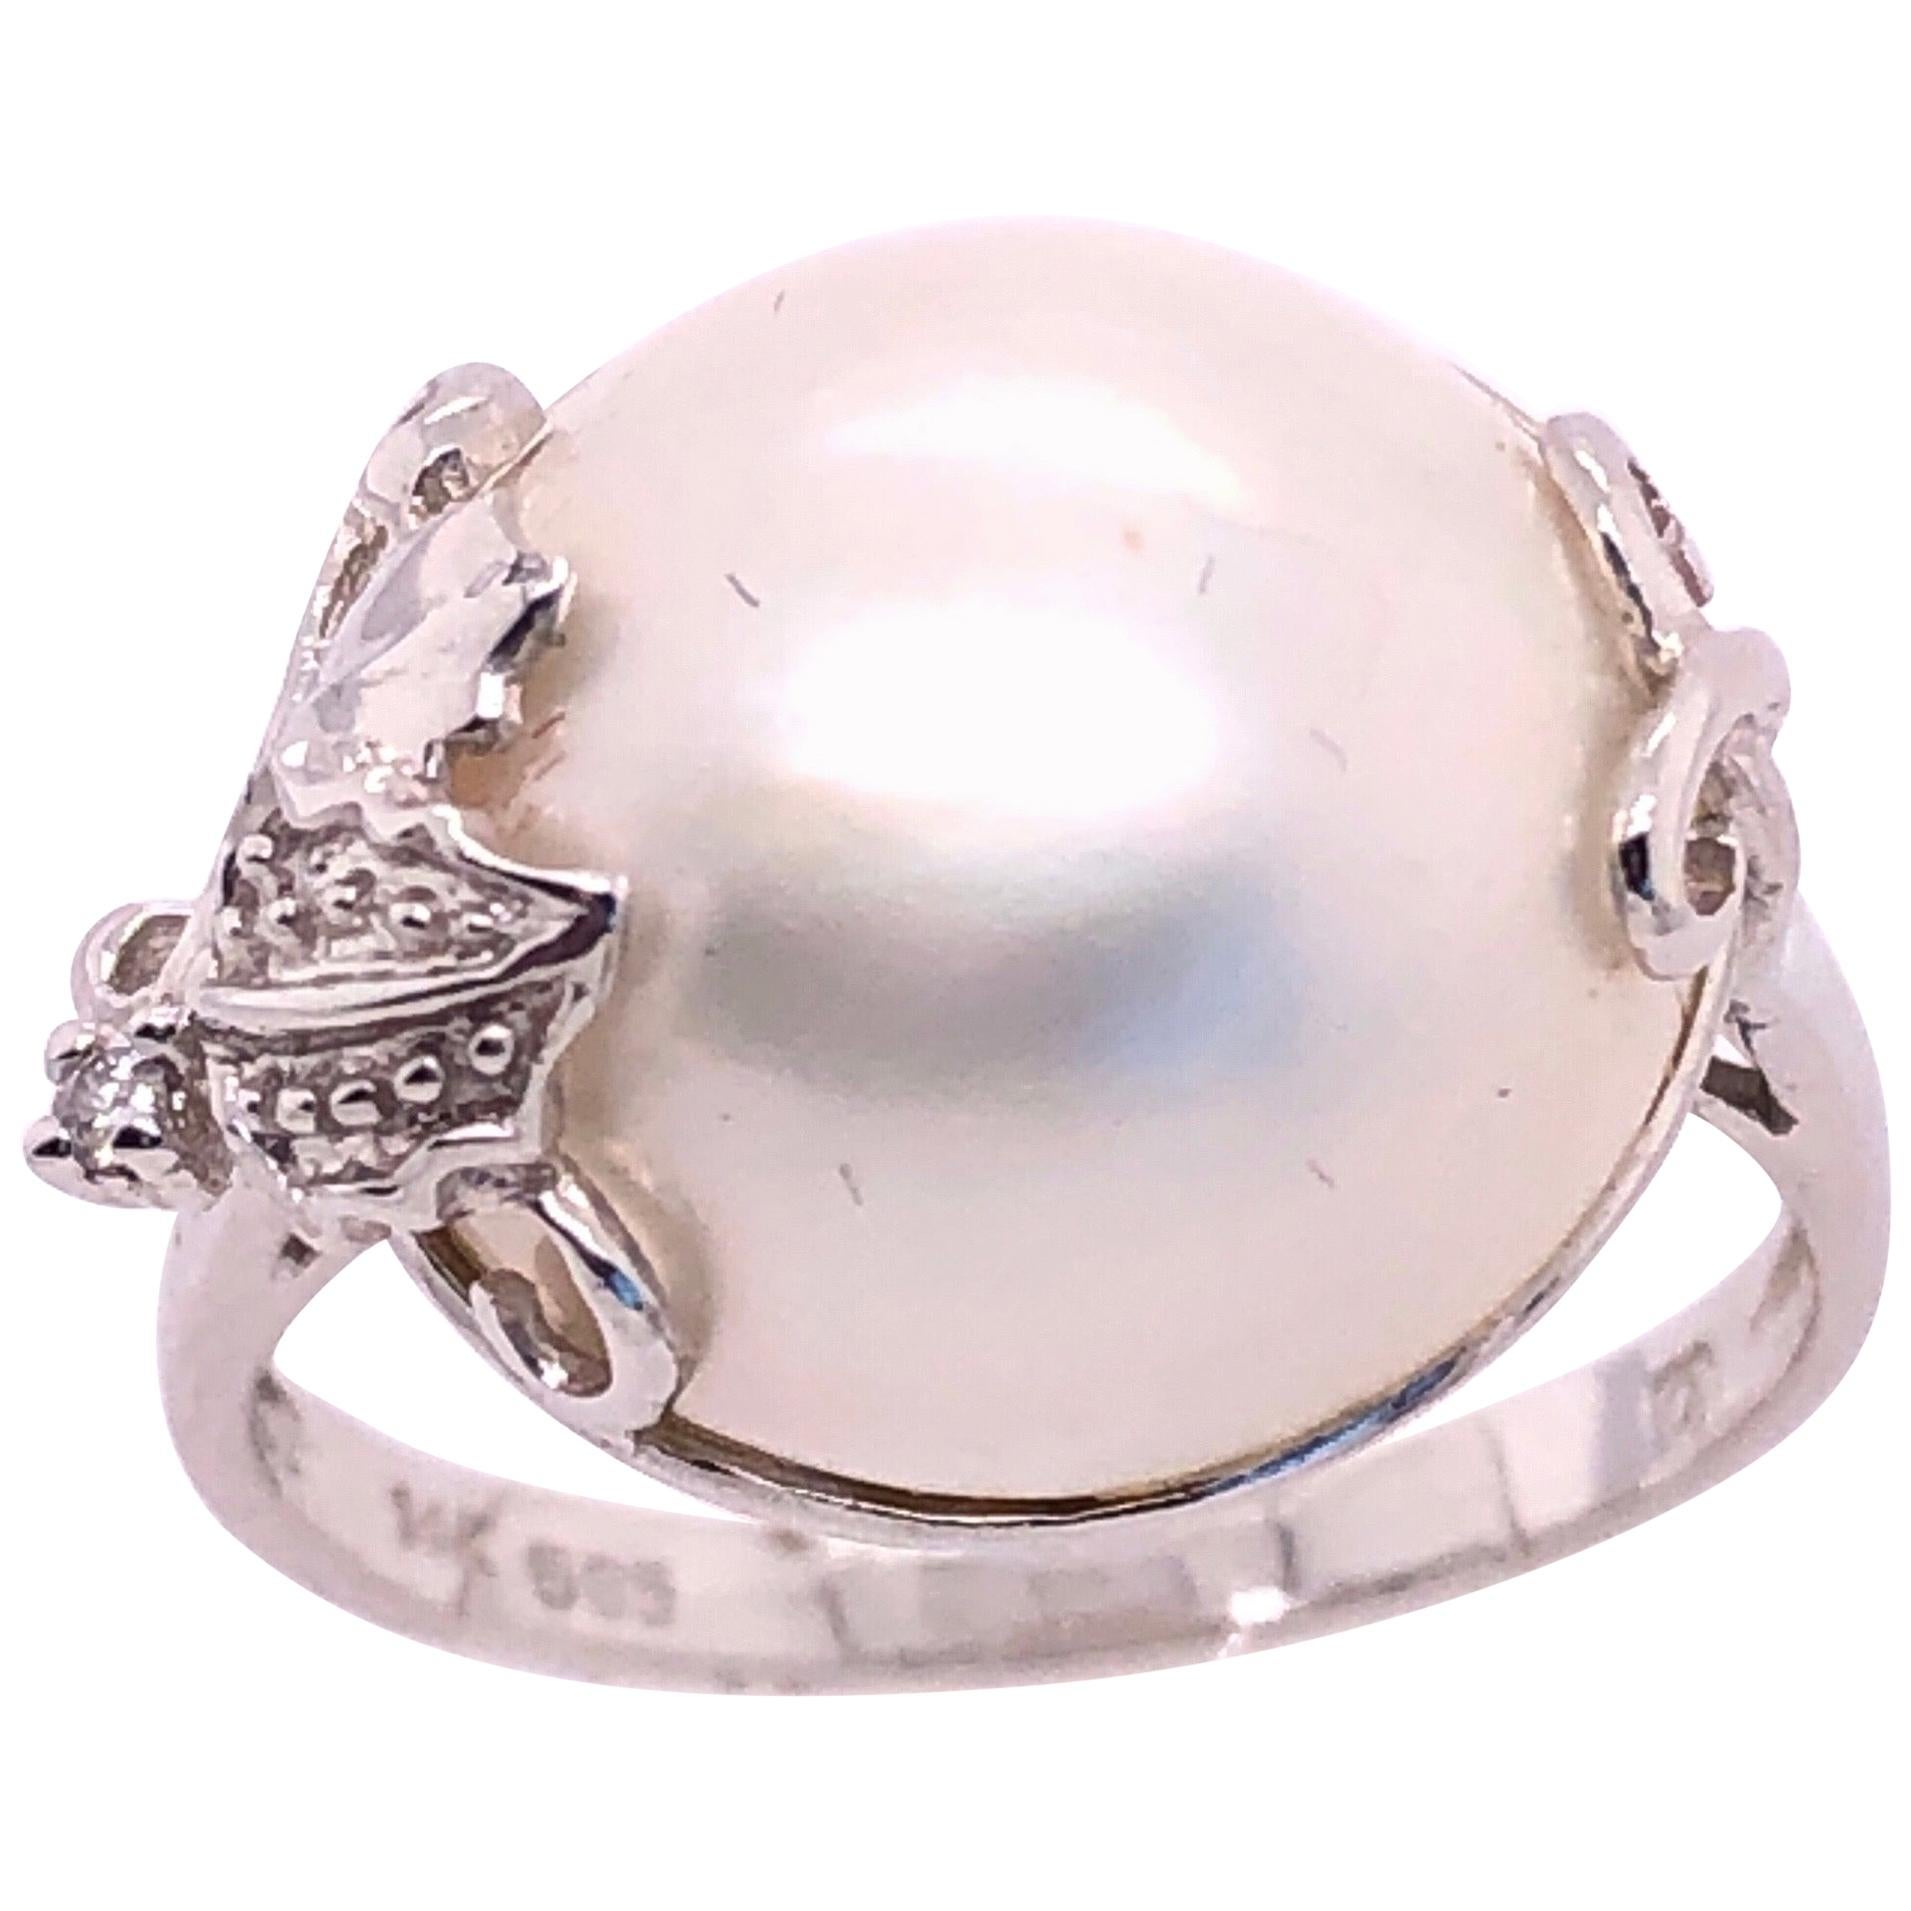 14 Karat White Gold Pearl Solitaire with Diamond Accent Ring